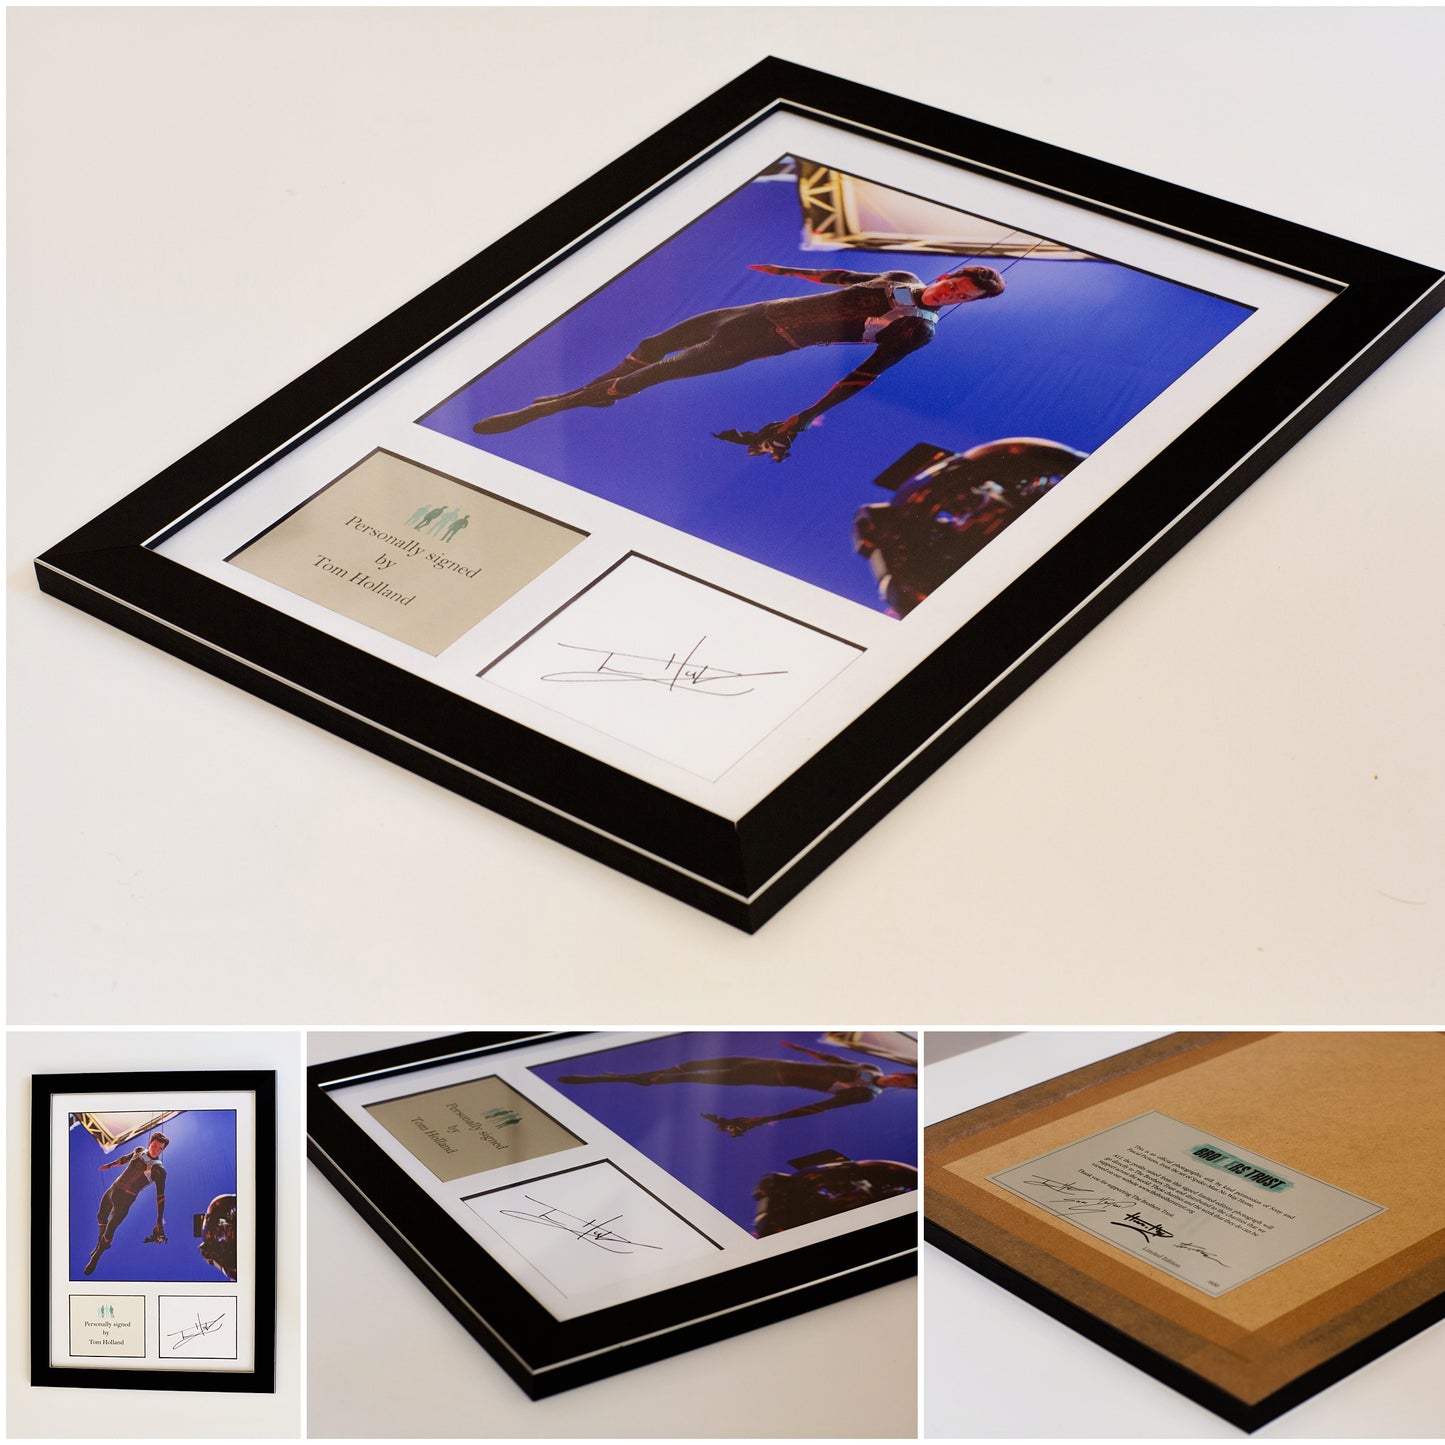 Limited Edition framed Official Spider-Man Set Photo Signed by Tom Holland WAS £350 NOW £295